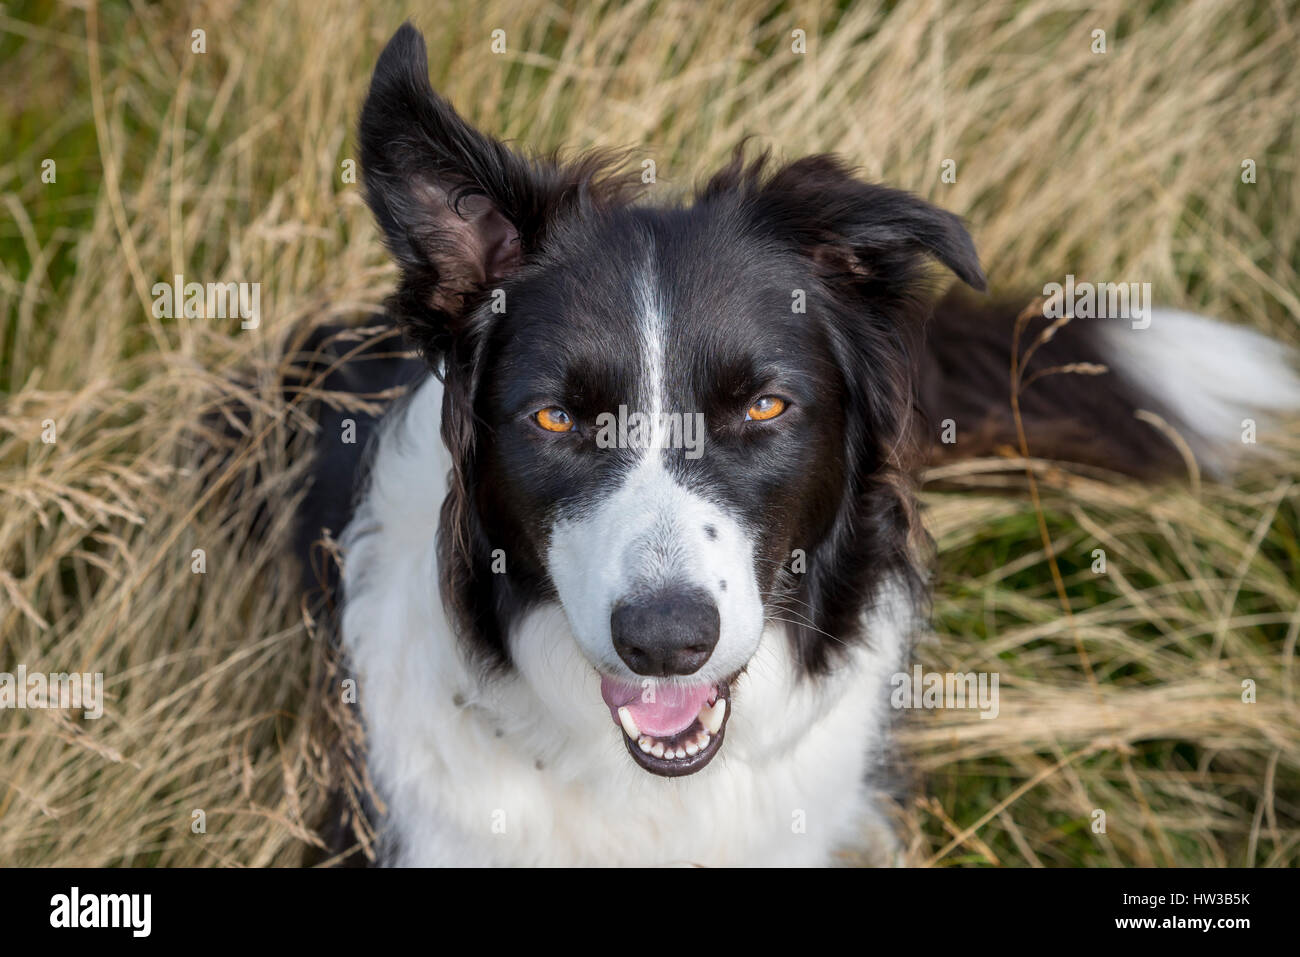 Cute Border Collie looking up at camera surrounded by grasses outdoors Stock Photo